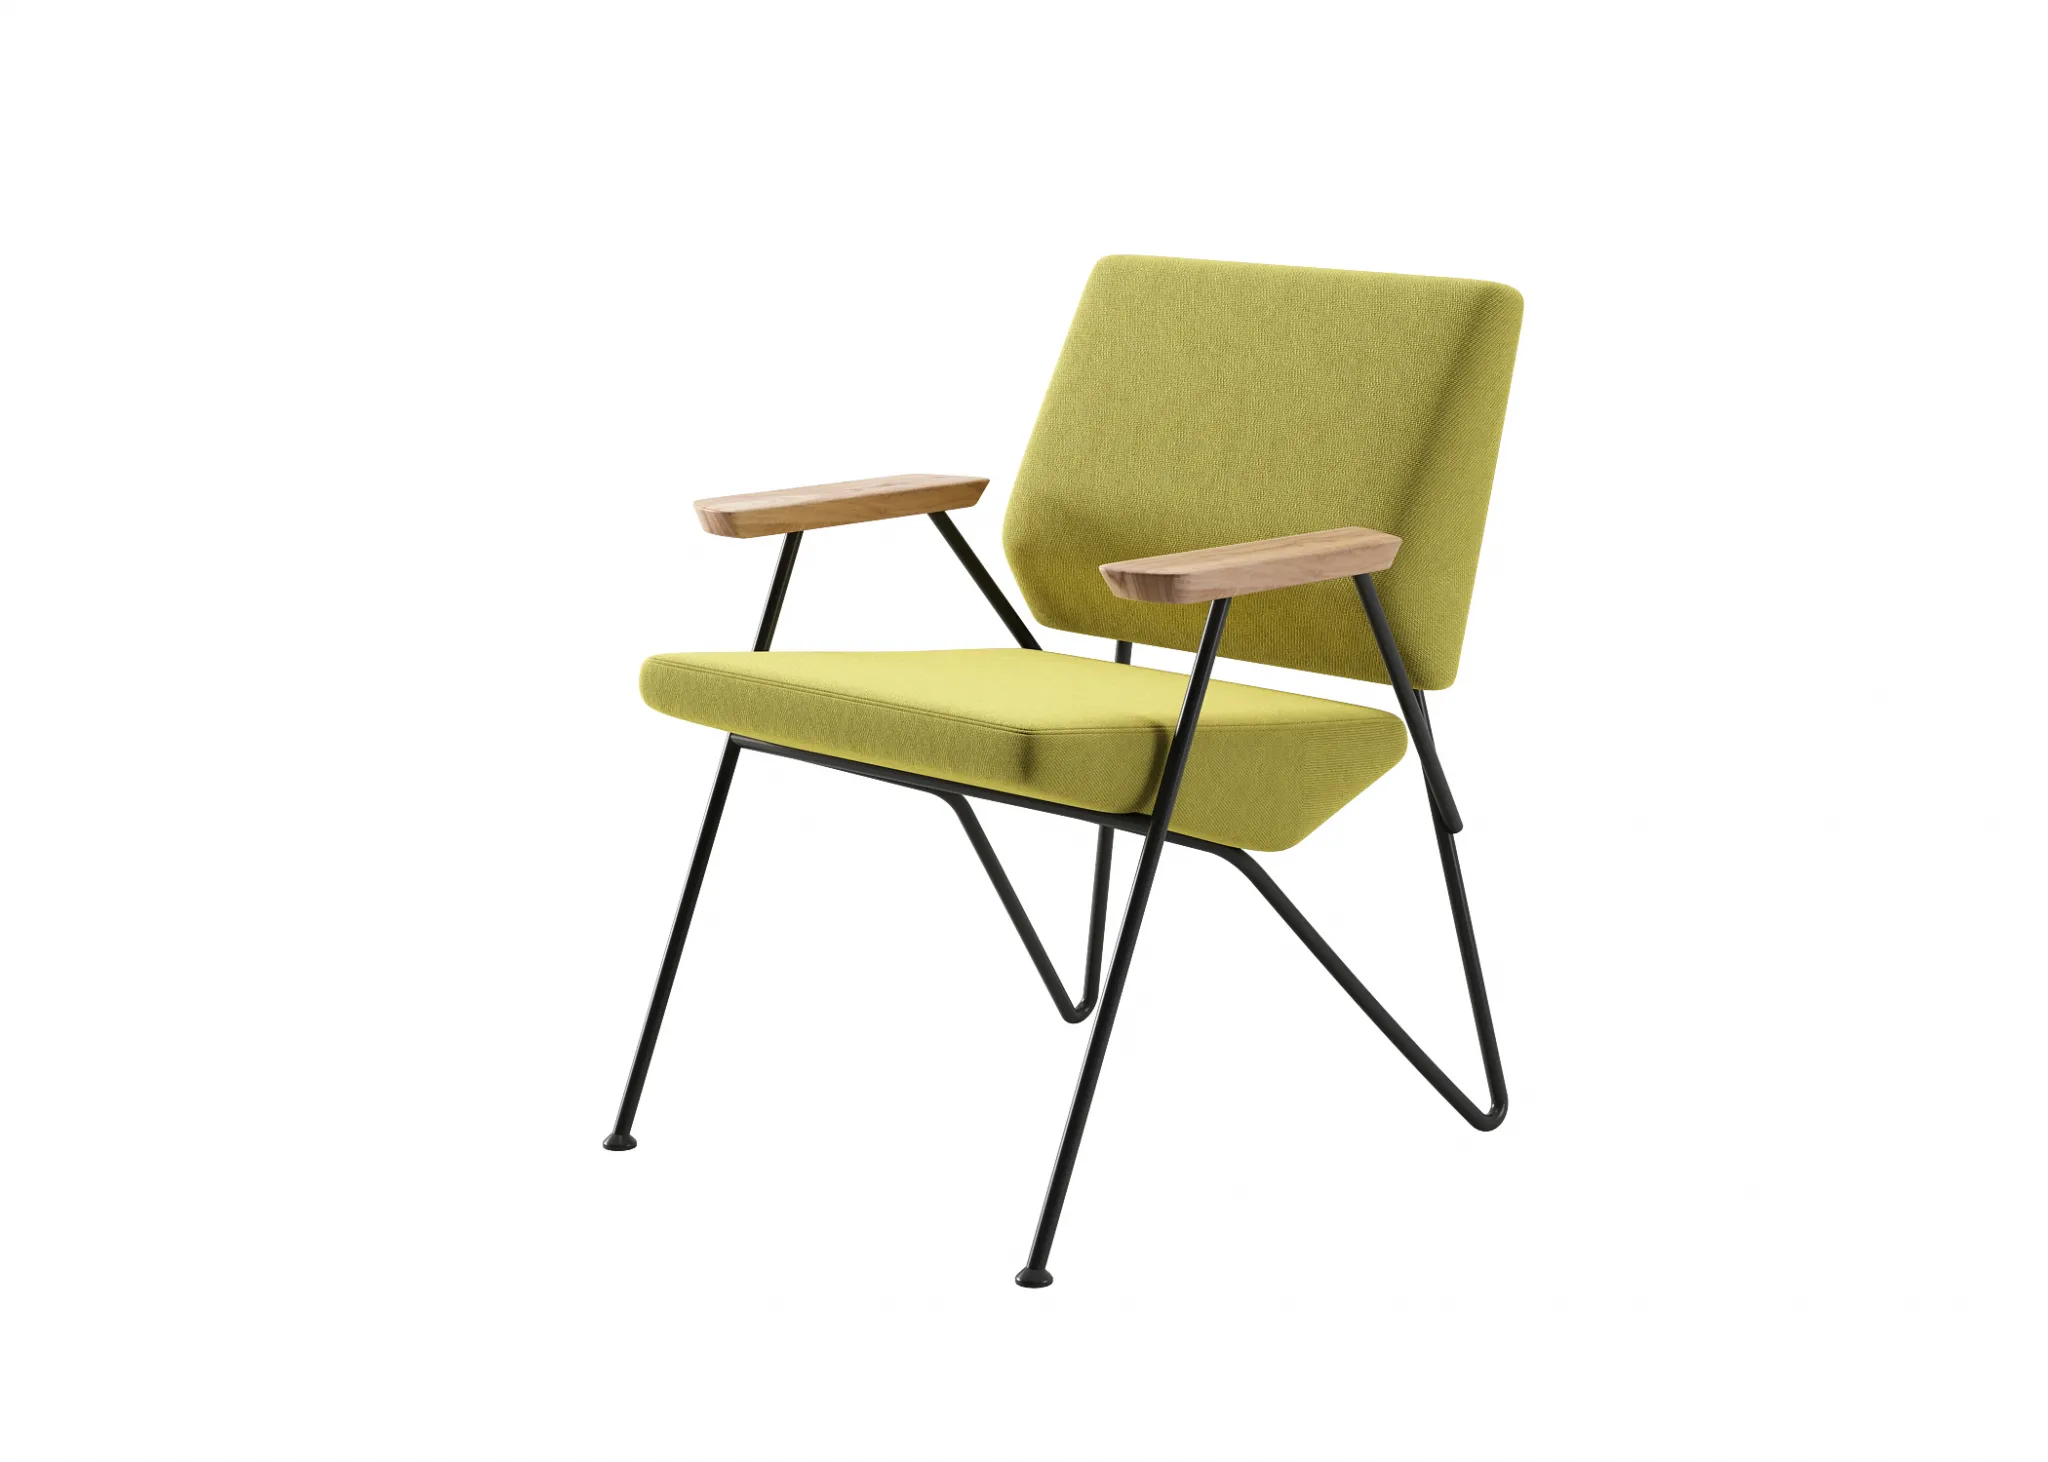 FURNITURE 3D MODELS – CHAIRS – 0374